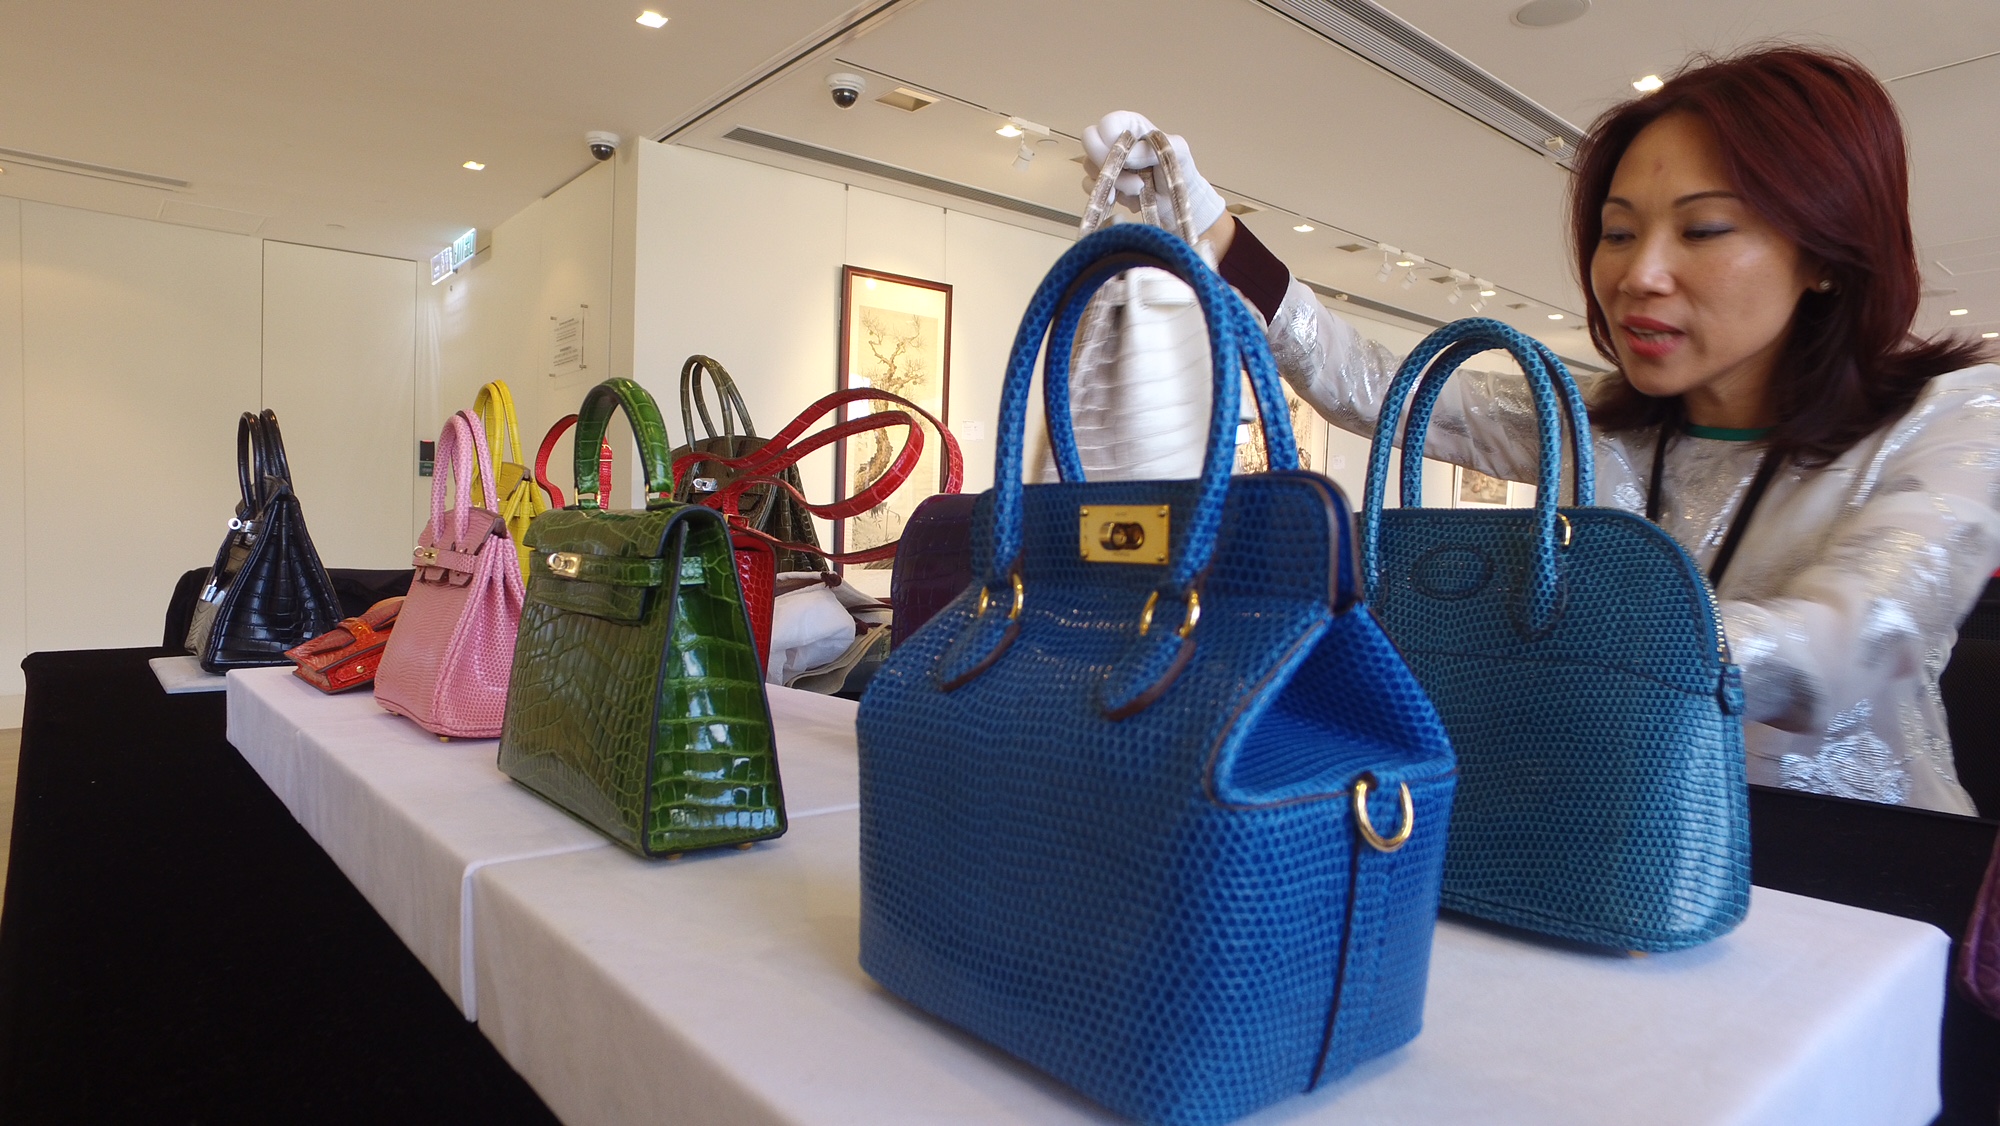 Must Read: Birkin Bag Sets Absurd Record Price at Auction, Thieves